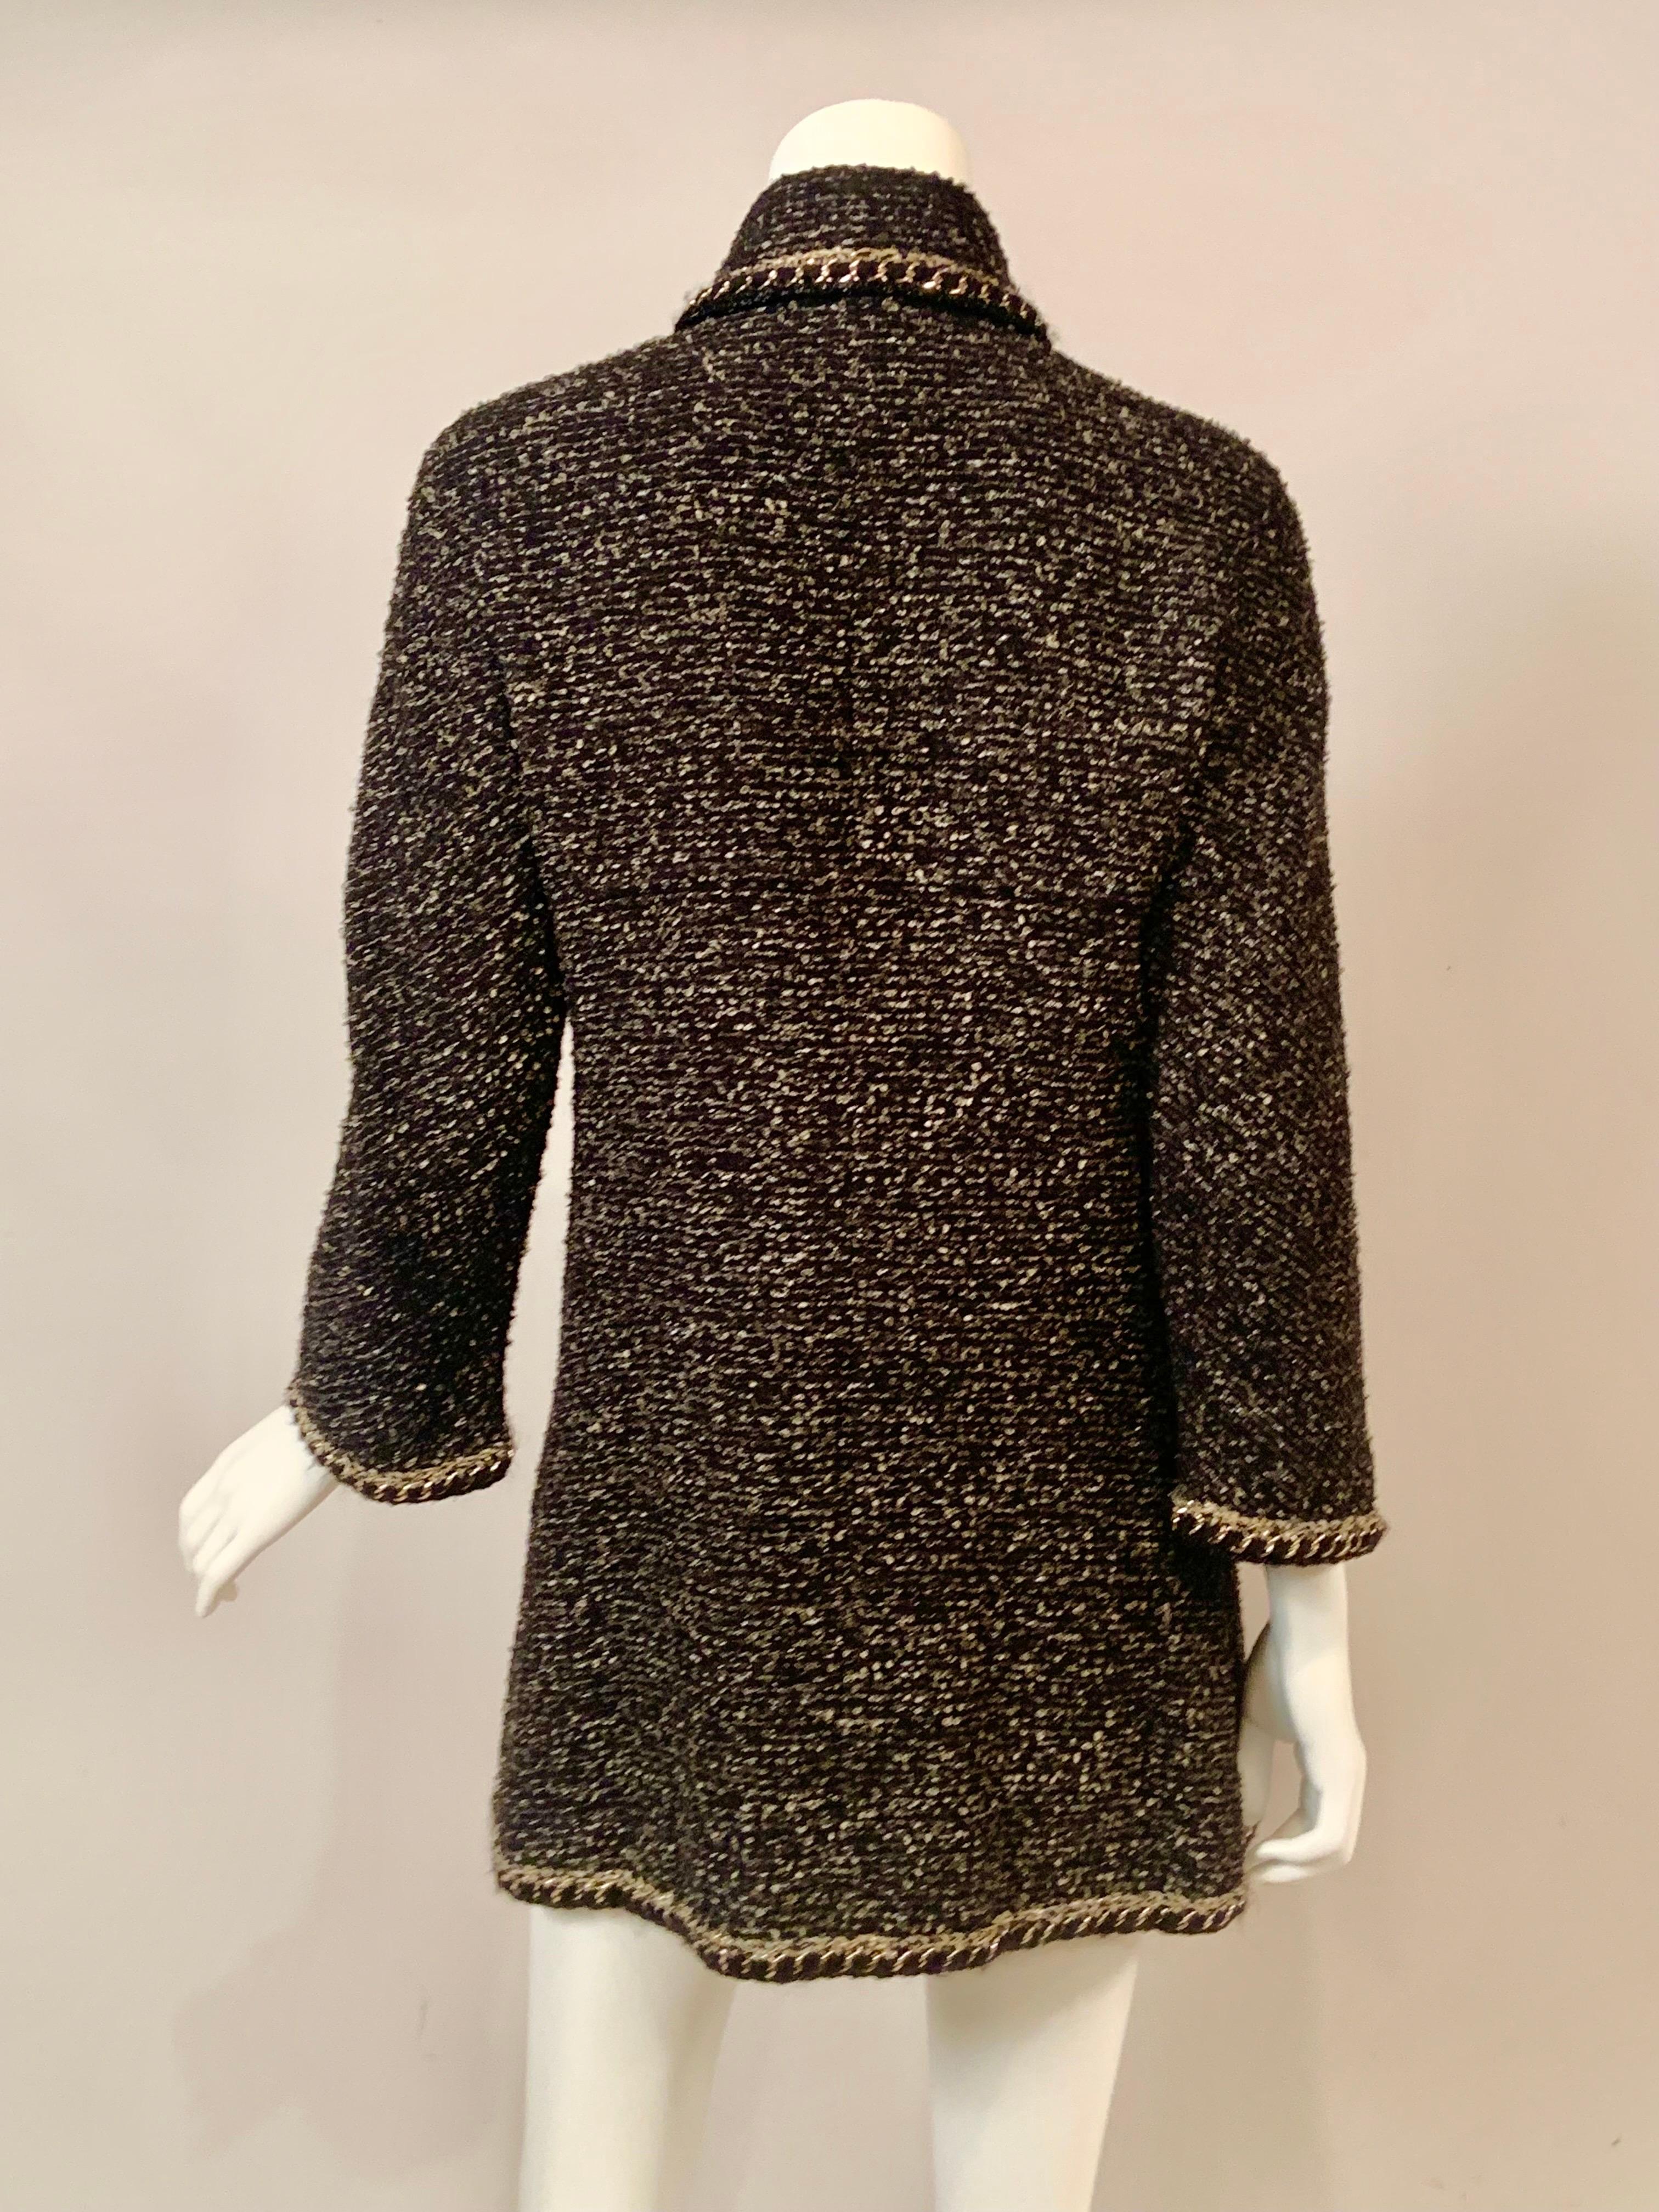 Chanel Chain Trimmed Black and Cream Tweed Jacket or Short Coat 5